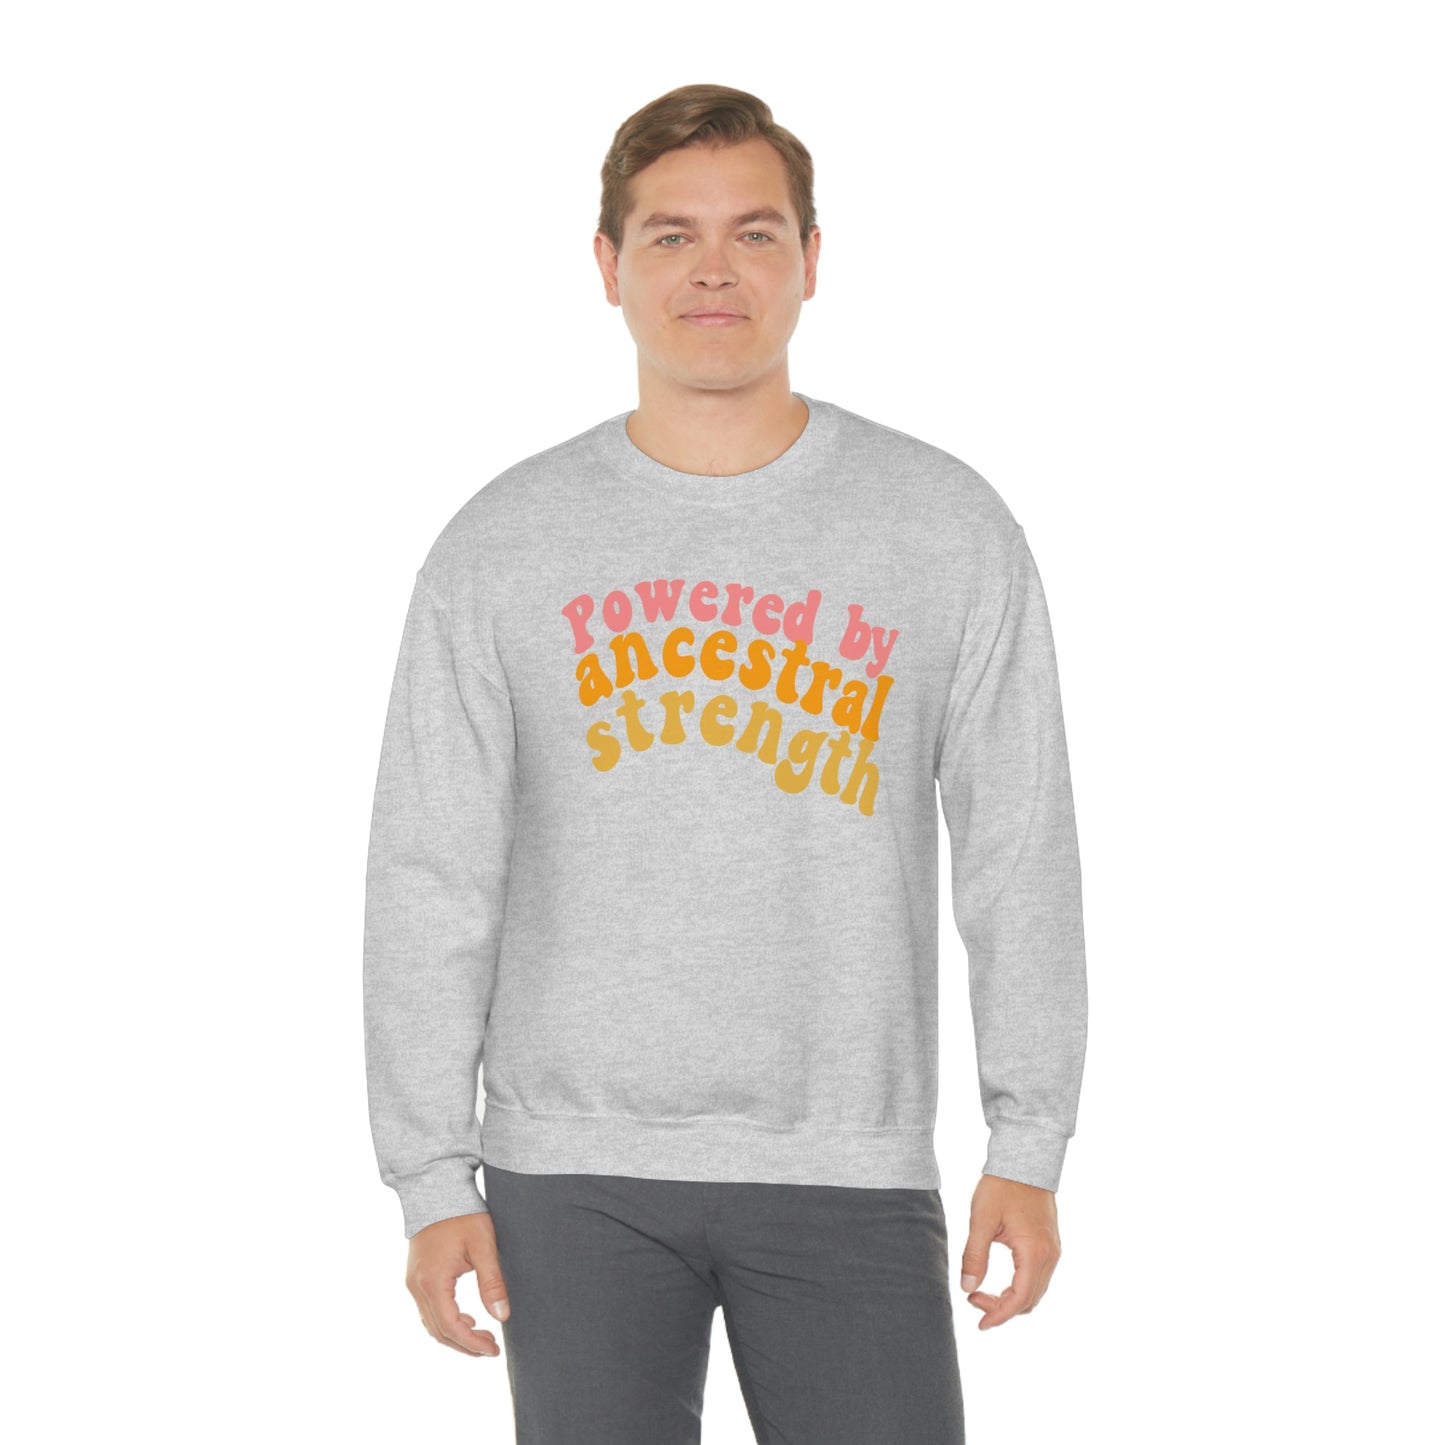 Powered by Ancestral Strength Crewneck Indigenous Sweatshirt Native Owned